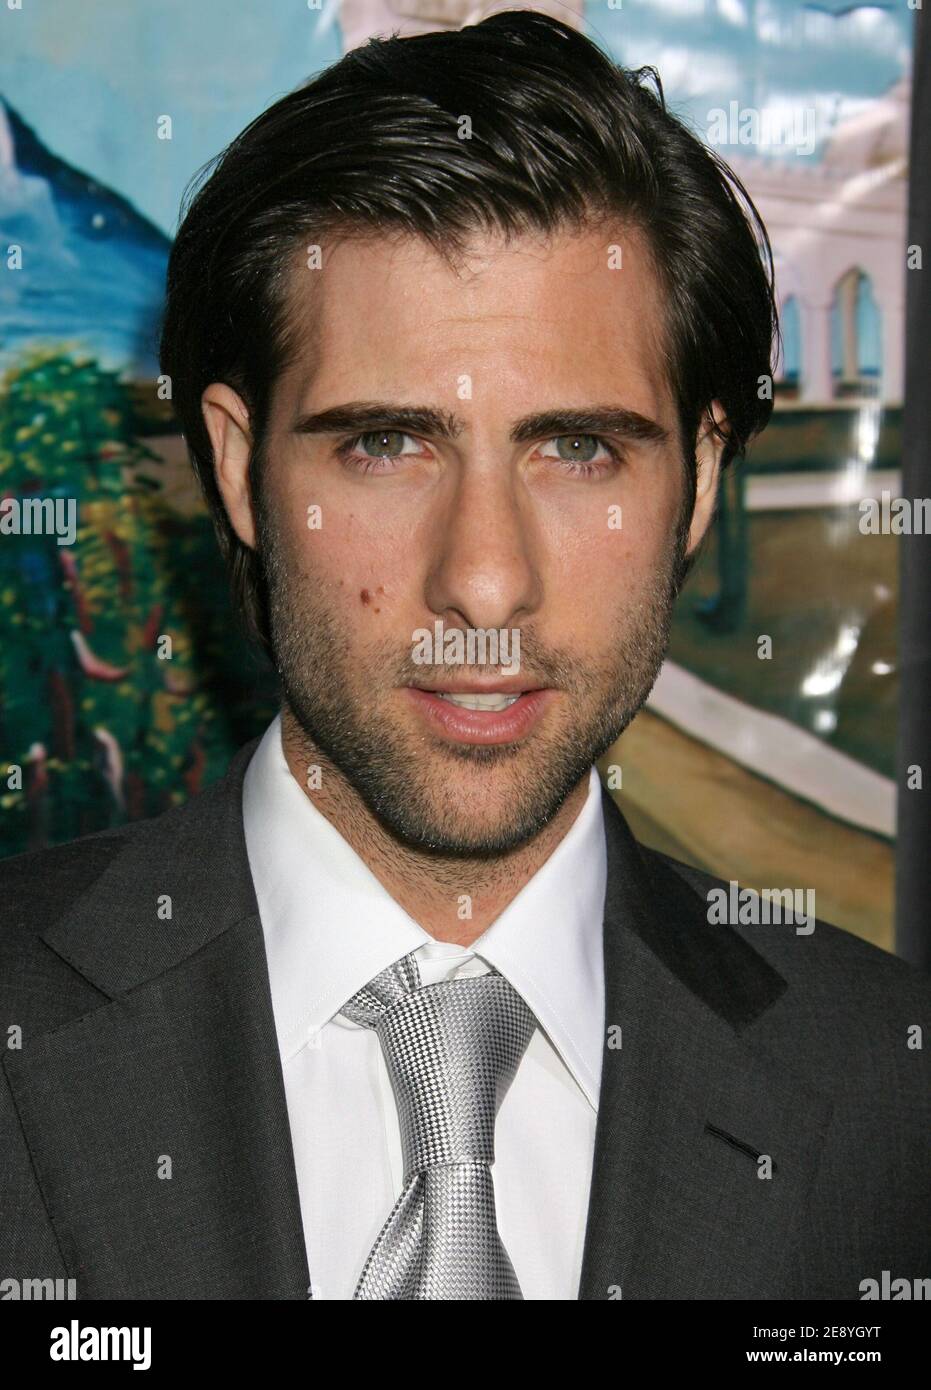 Jason Schwartzman arriving for 'The Darjeeling Limited' premiere at The Academy of Motion Picture Arts And Sciences in Beverly Hills, CA, USA on October 4, 2007. Photo by Baxter/ABACAPRESS.COM Stock Photo